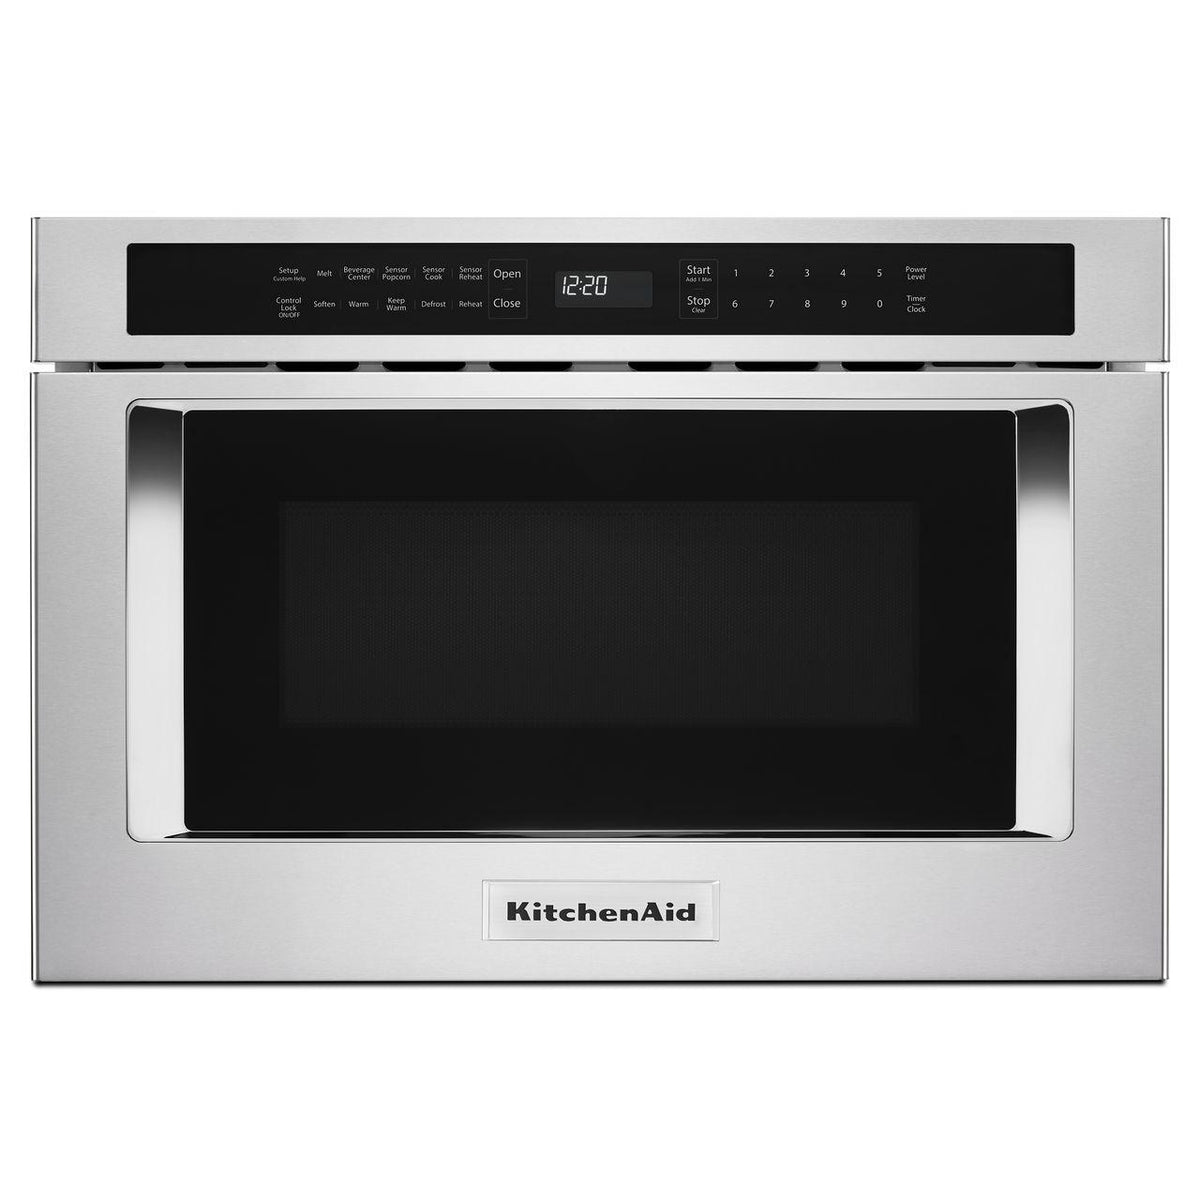 KitchenAid 24-inch, 1.2 cu. ft. Under-Counter Microwave Oven Drawer KMBD104GSS IMAGE 1